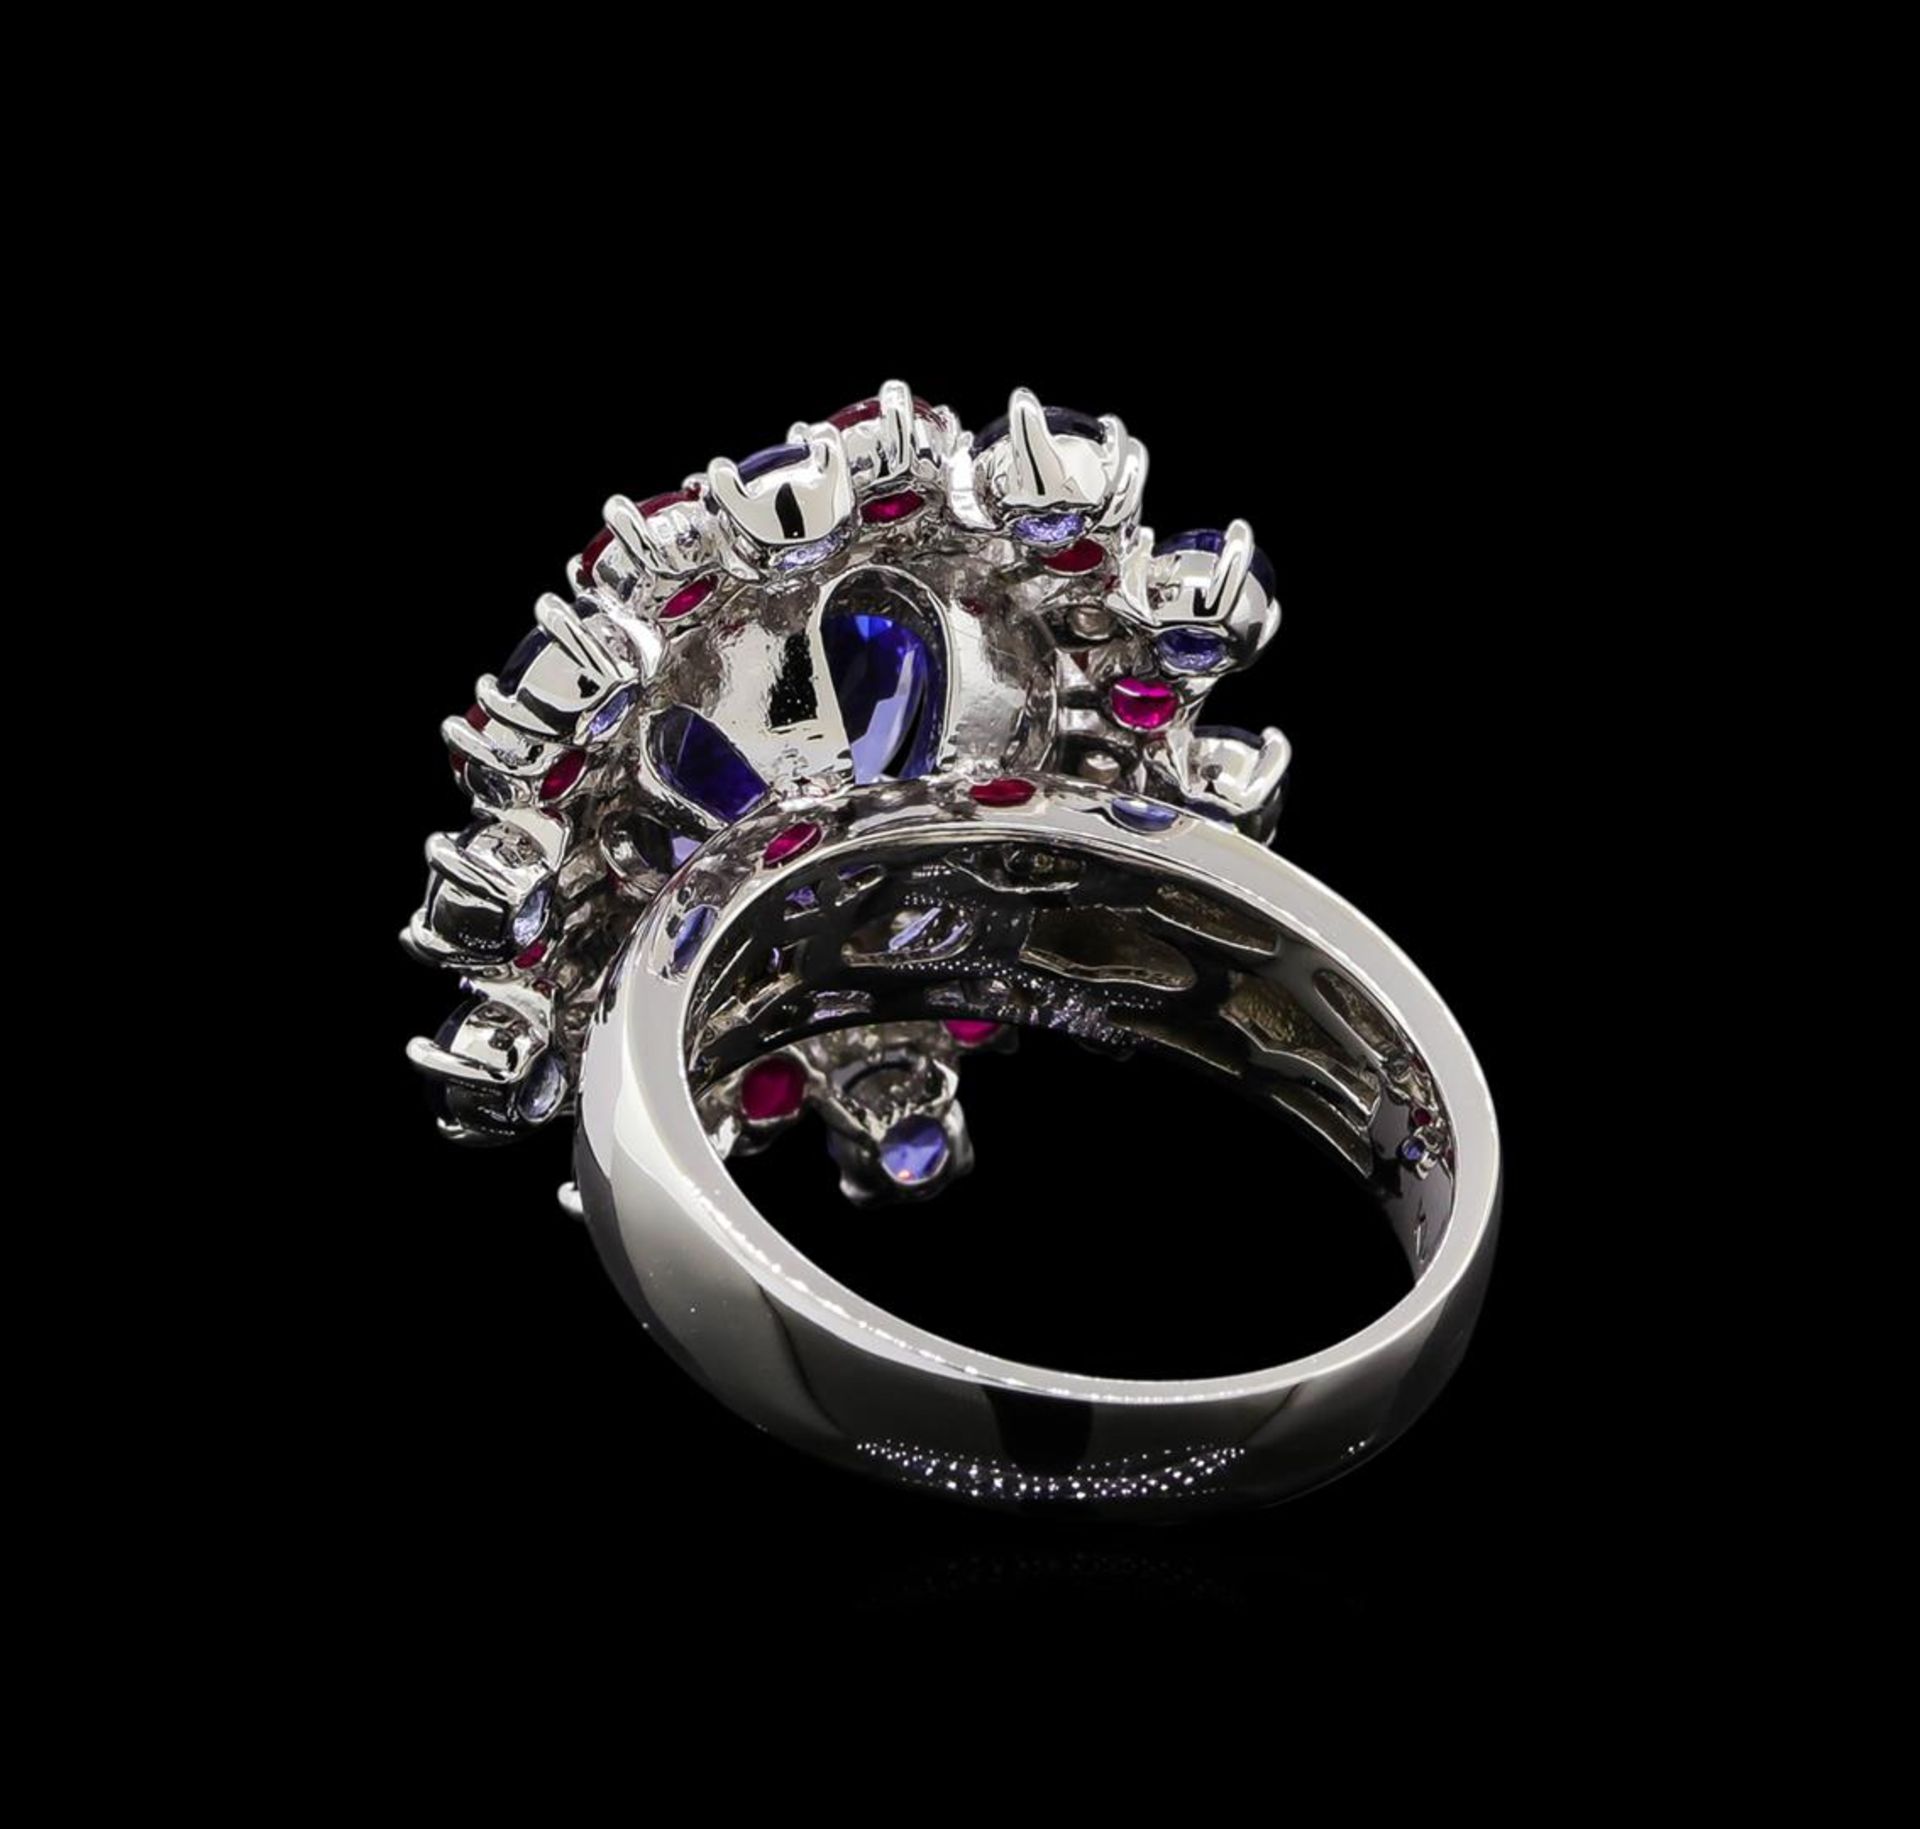 14KT White Gold 3.58 ctw Tanzanite, Sapphire, Ruby and Diamond Ring - Image 3 of 5